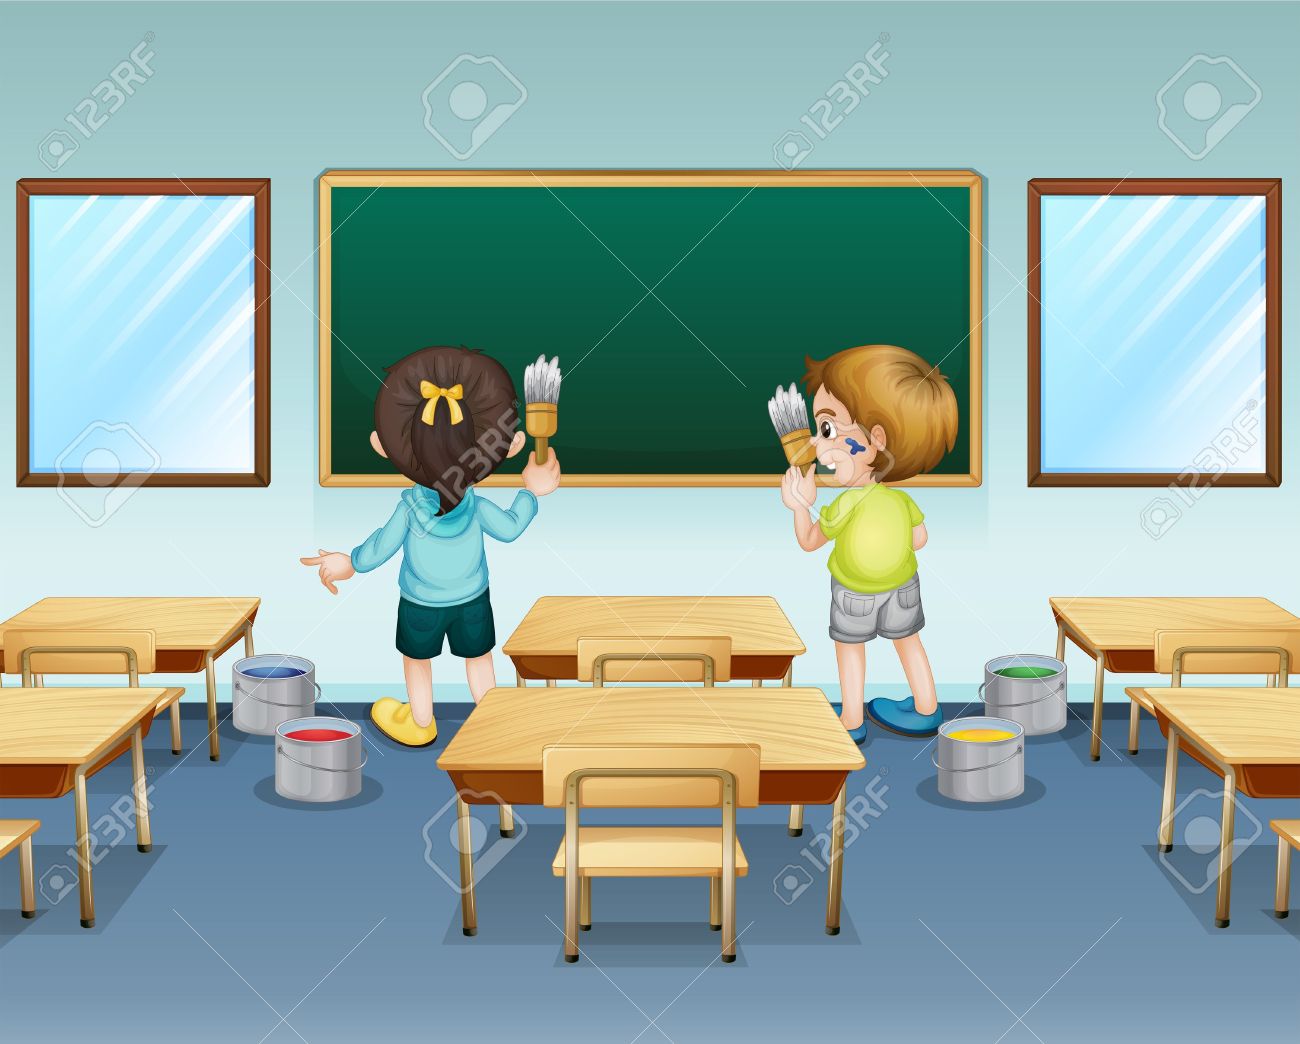 Cleaning class clipart 